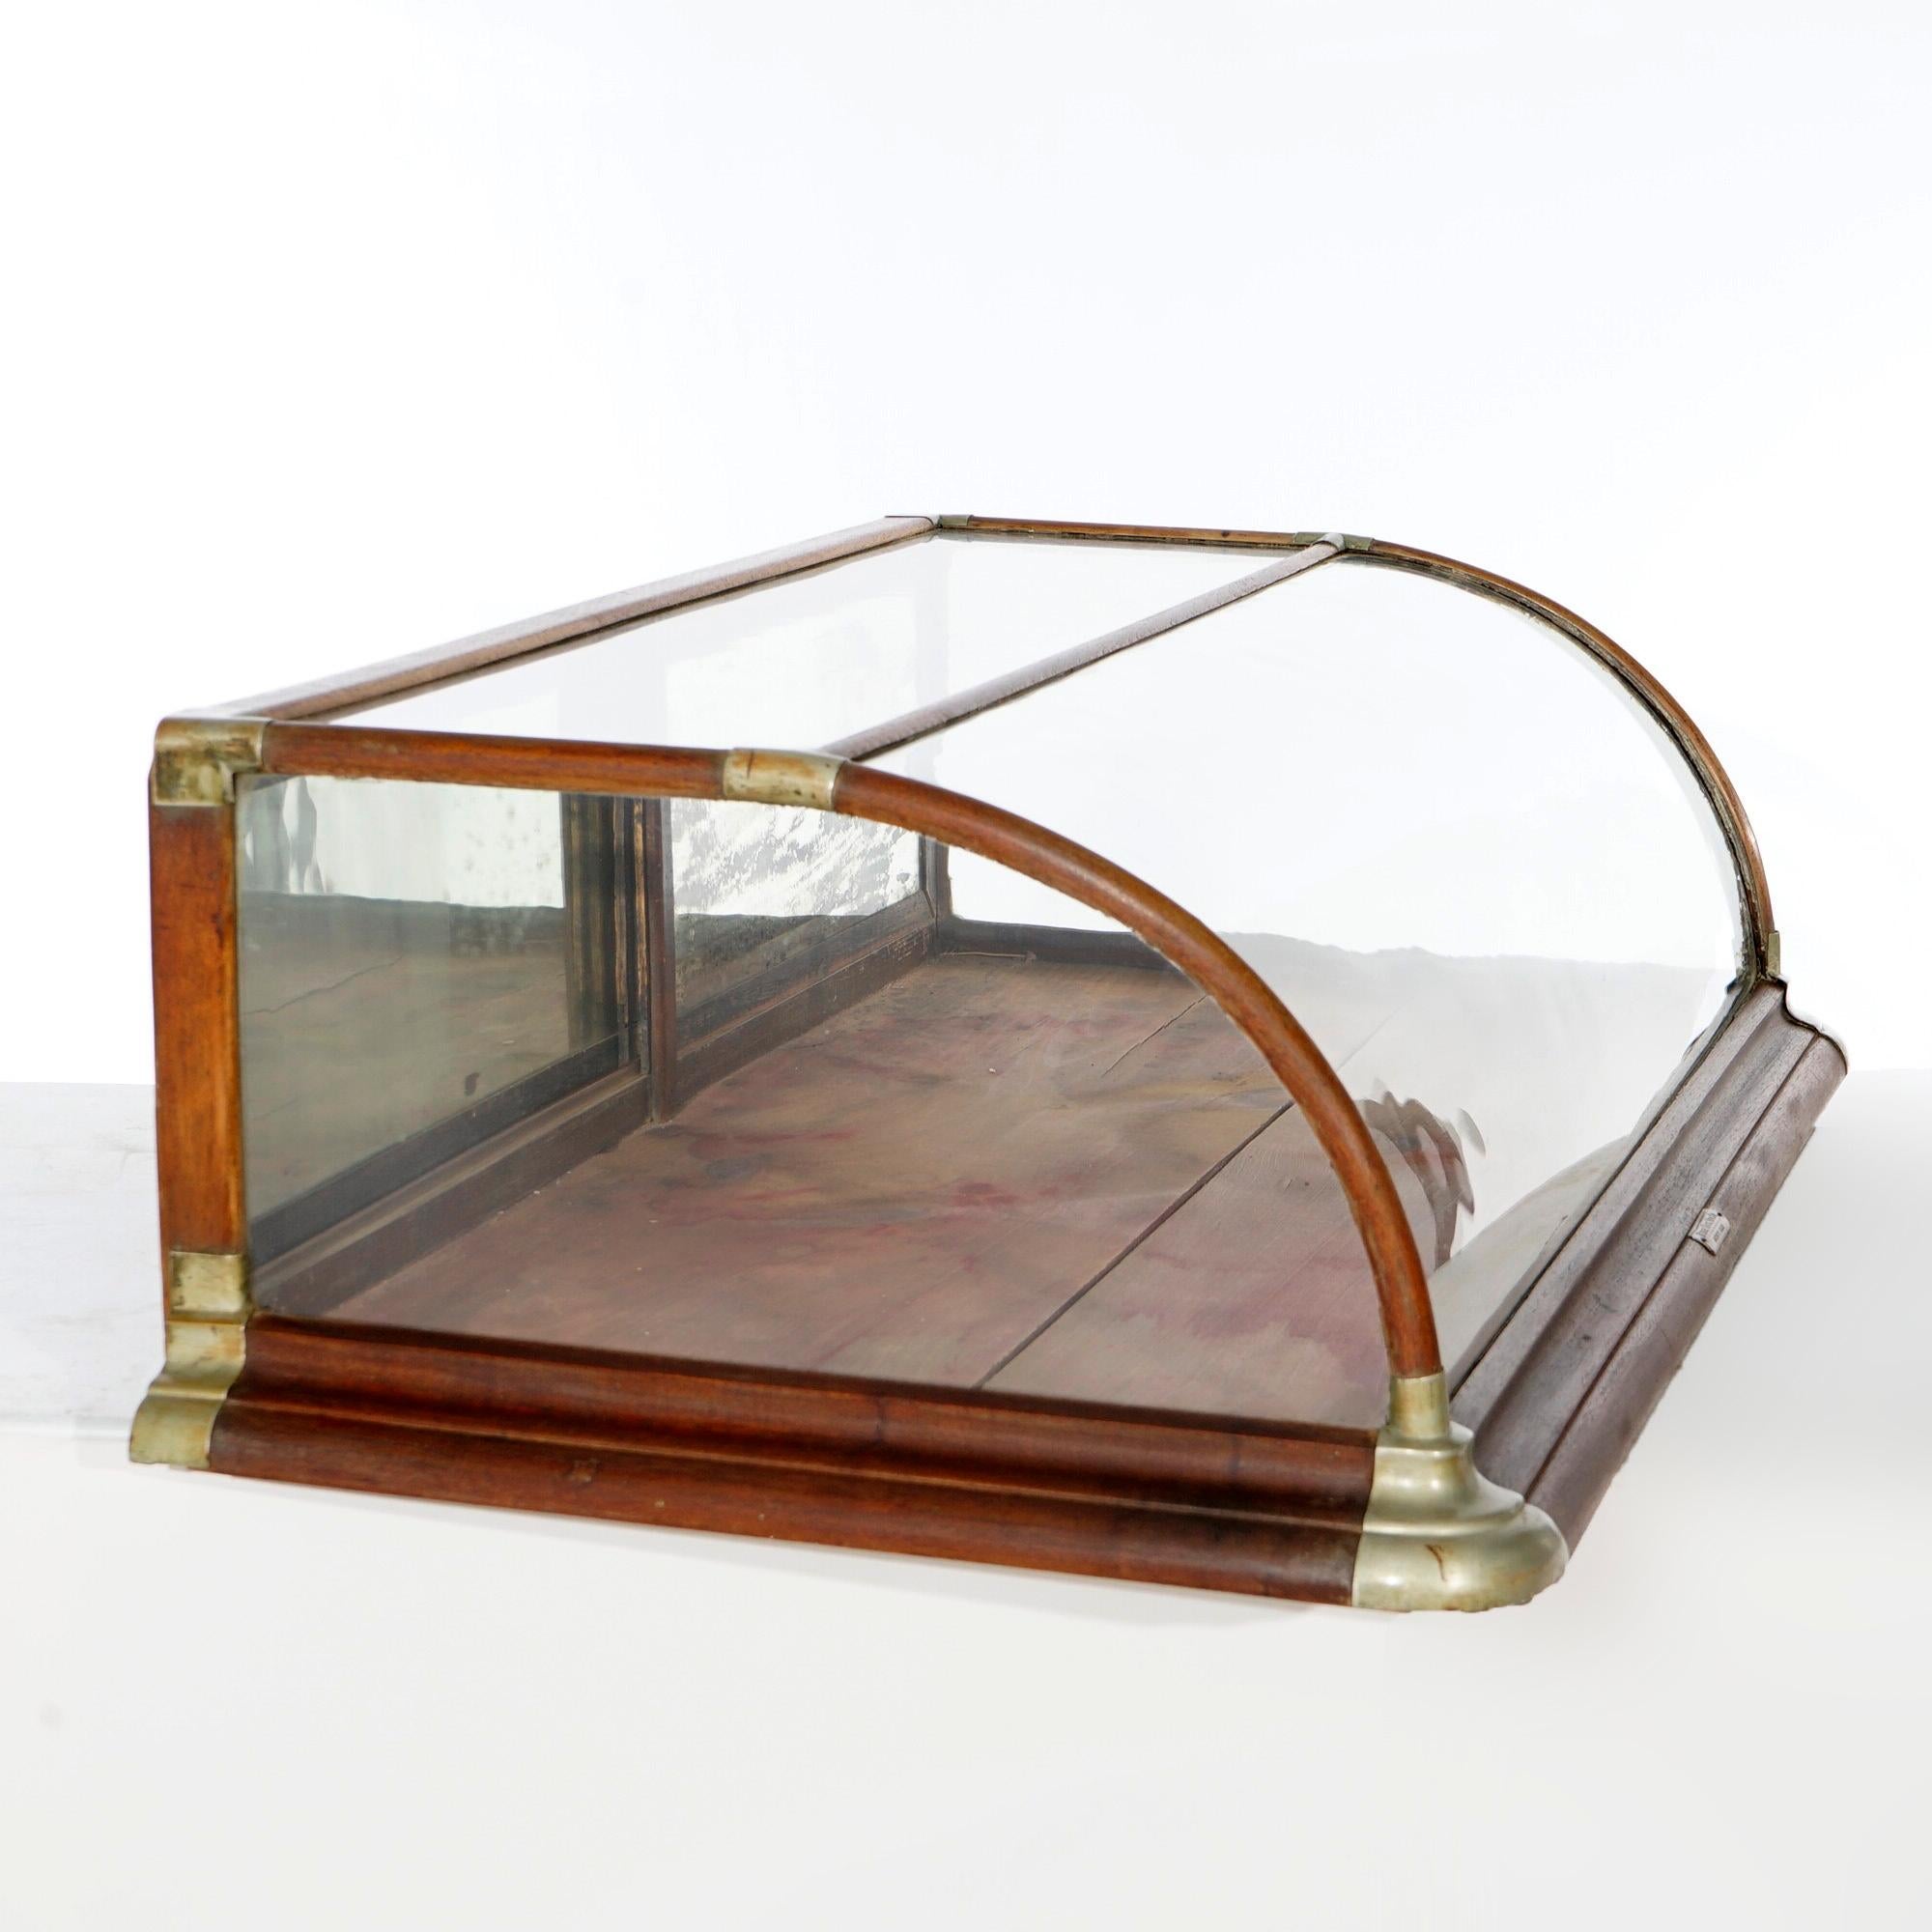 An antique country store table top display case by Burge Huck Manufacturing in Quincy, Illinois offers oak construction with curved glass front and sliding access doors, c1900

Measures- 14'' H x 48.25'' W x 26.75'' D.

*Ask about DISCOUNTED